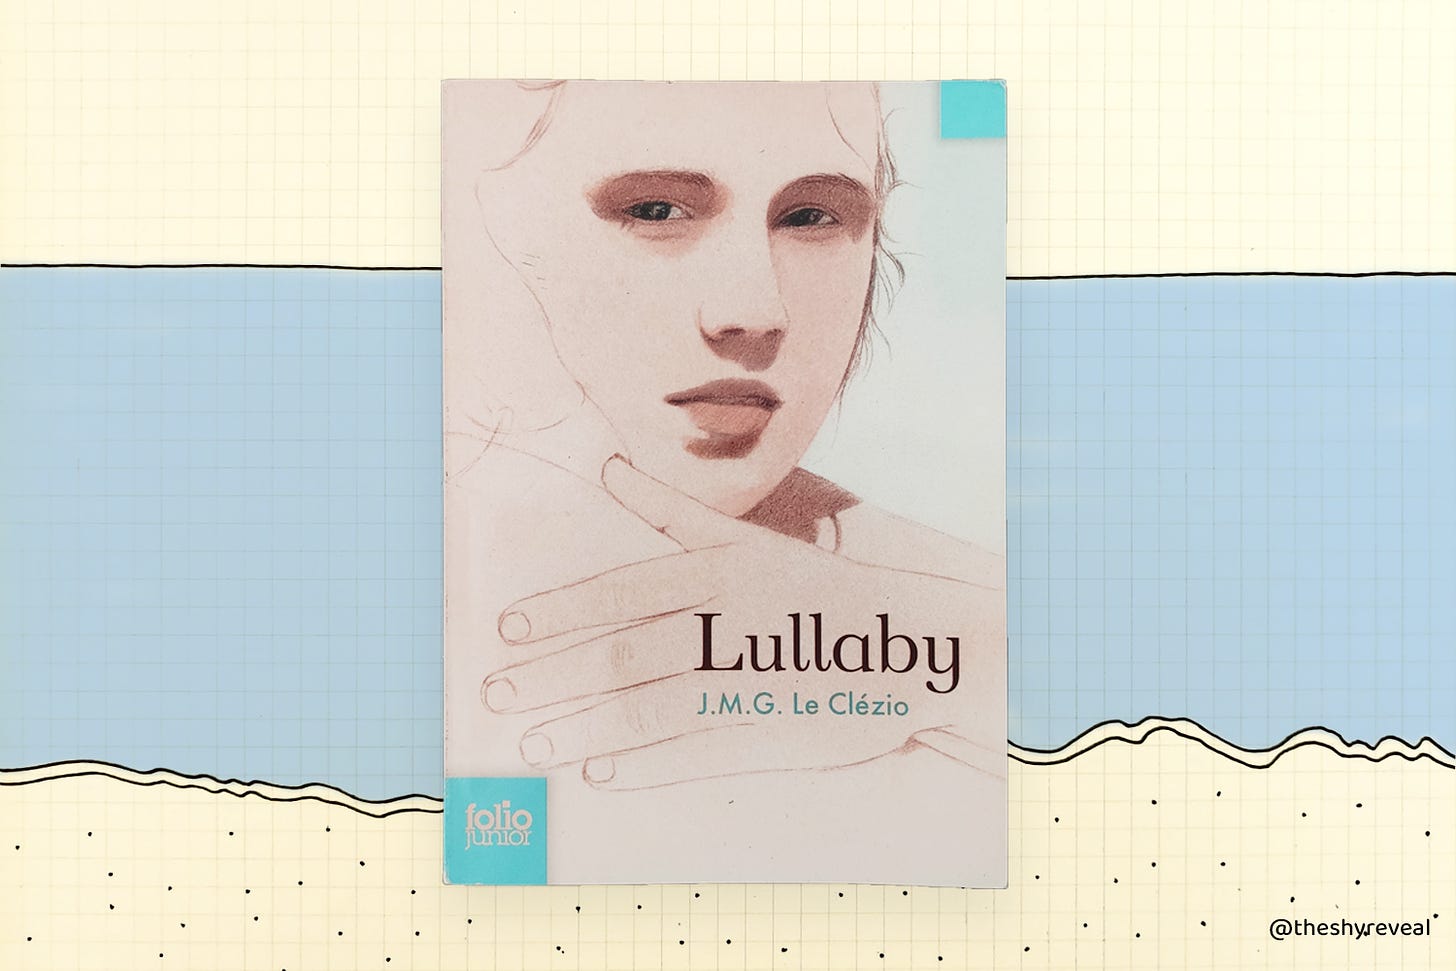 Book cover of "Lullaby" by J.M.G. Le Clézio.